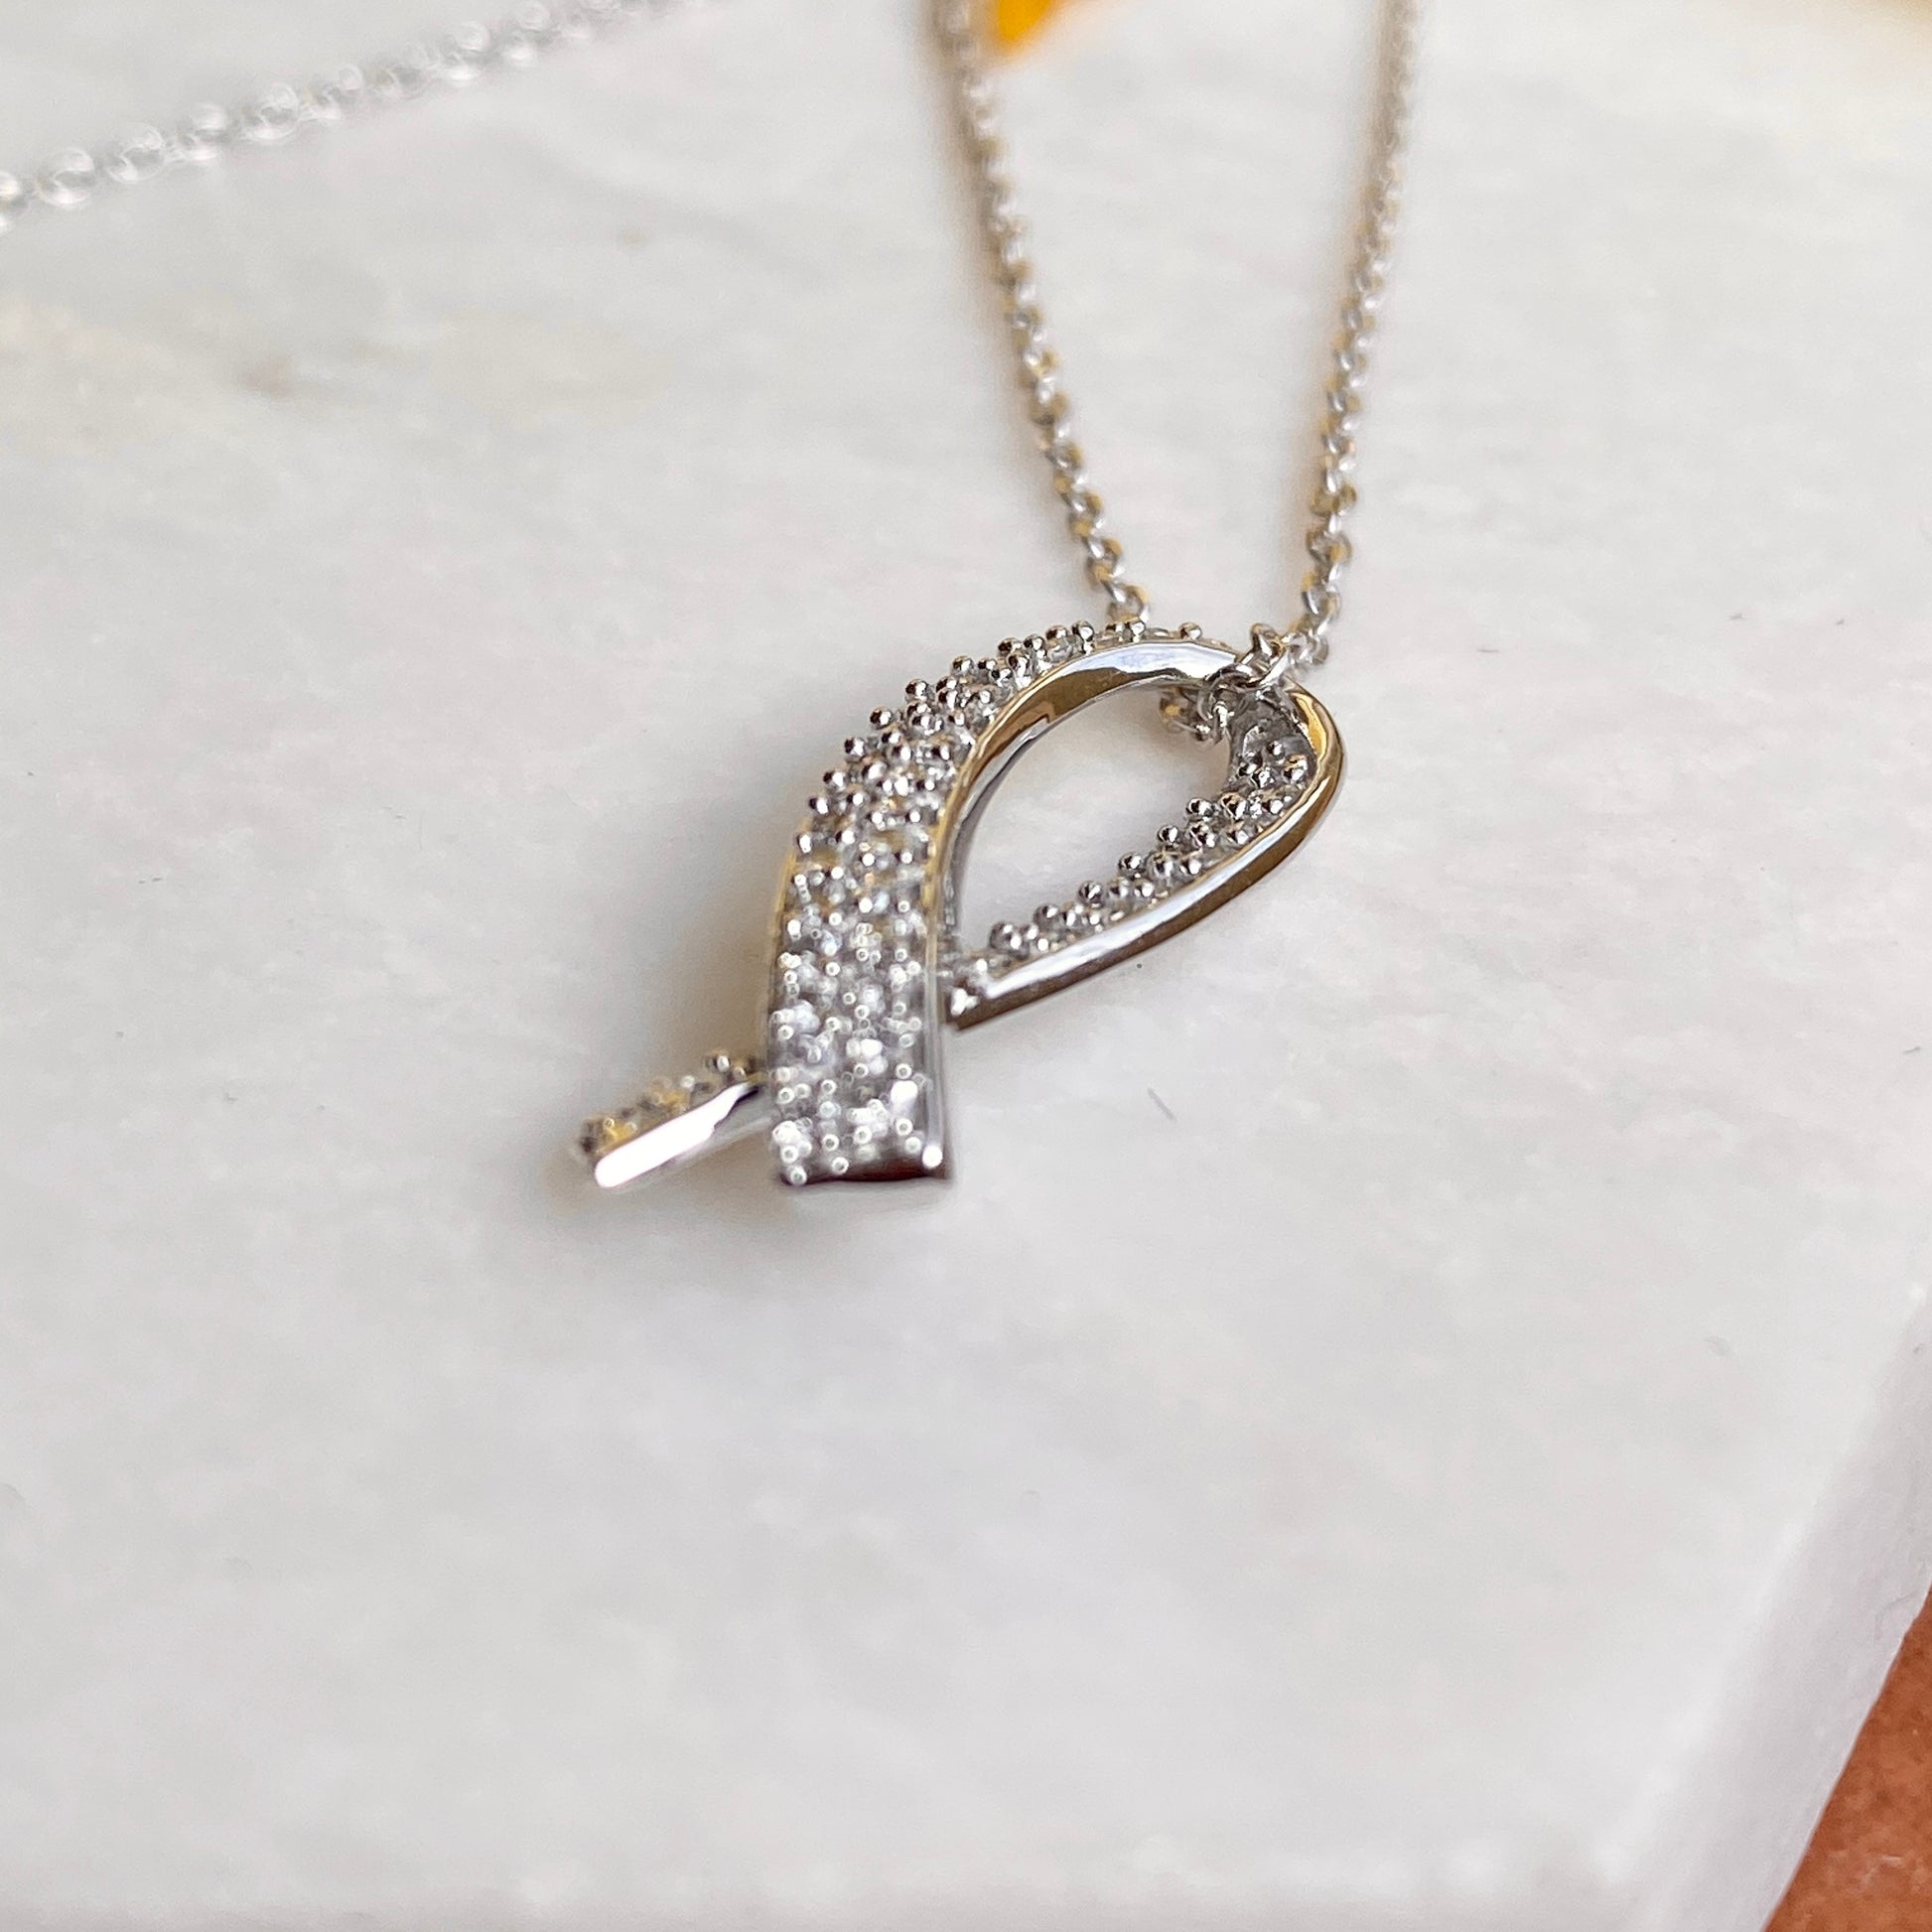 14KT White Gold Pave Diamond Breast Cancer Awareness Ribbon Pendant Necklace, 14KT White Gold Pave Diamond Breast Cancer Awareness Ribbon Pendant Necklace - Legacy Saint Jewelry